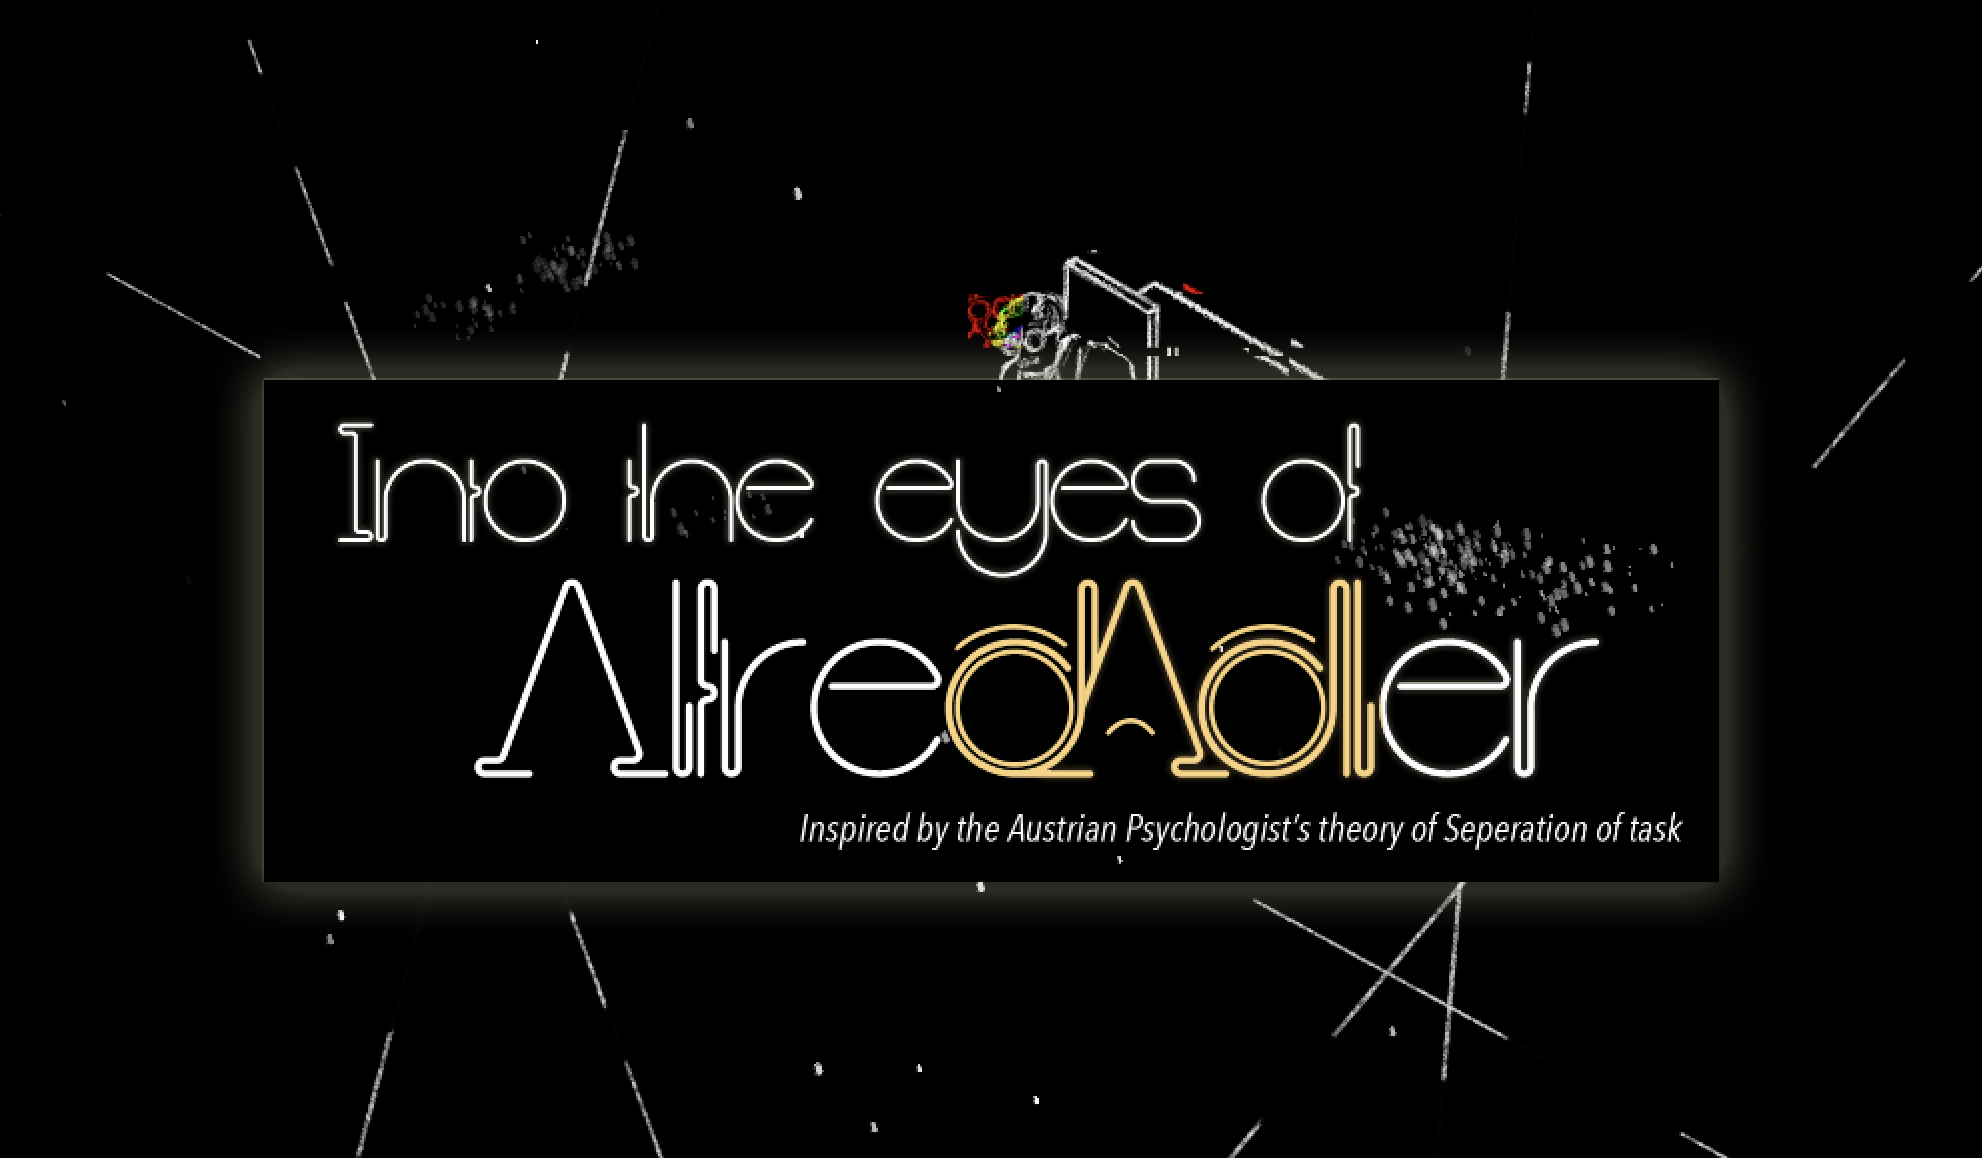 Into the Eyes of Alfred Adler